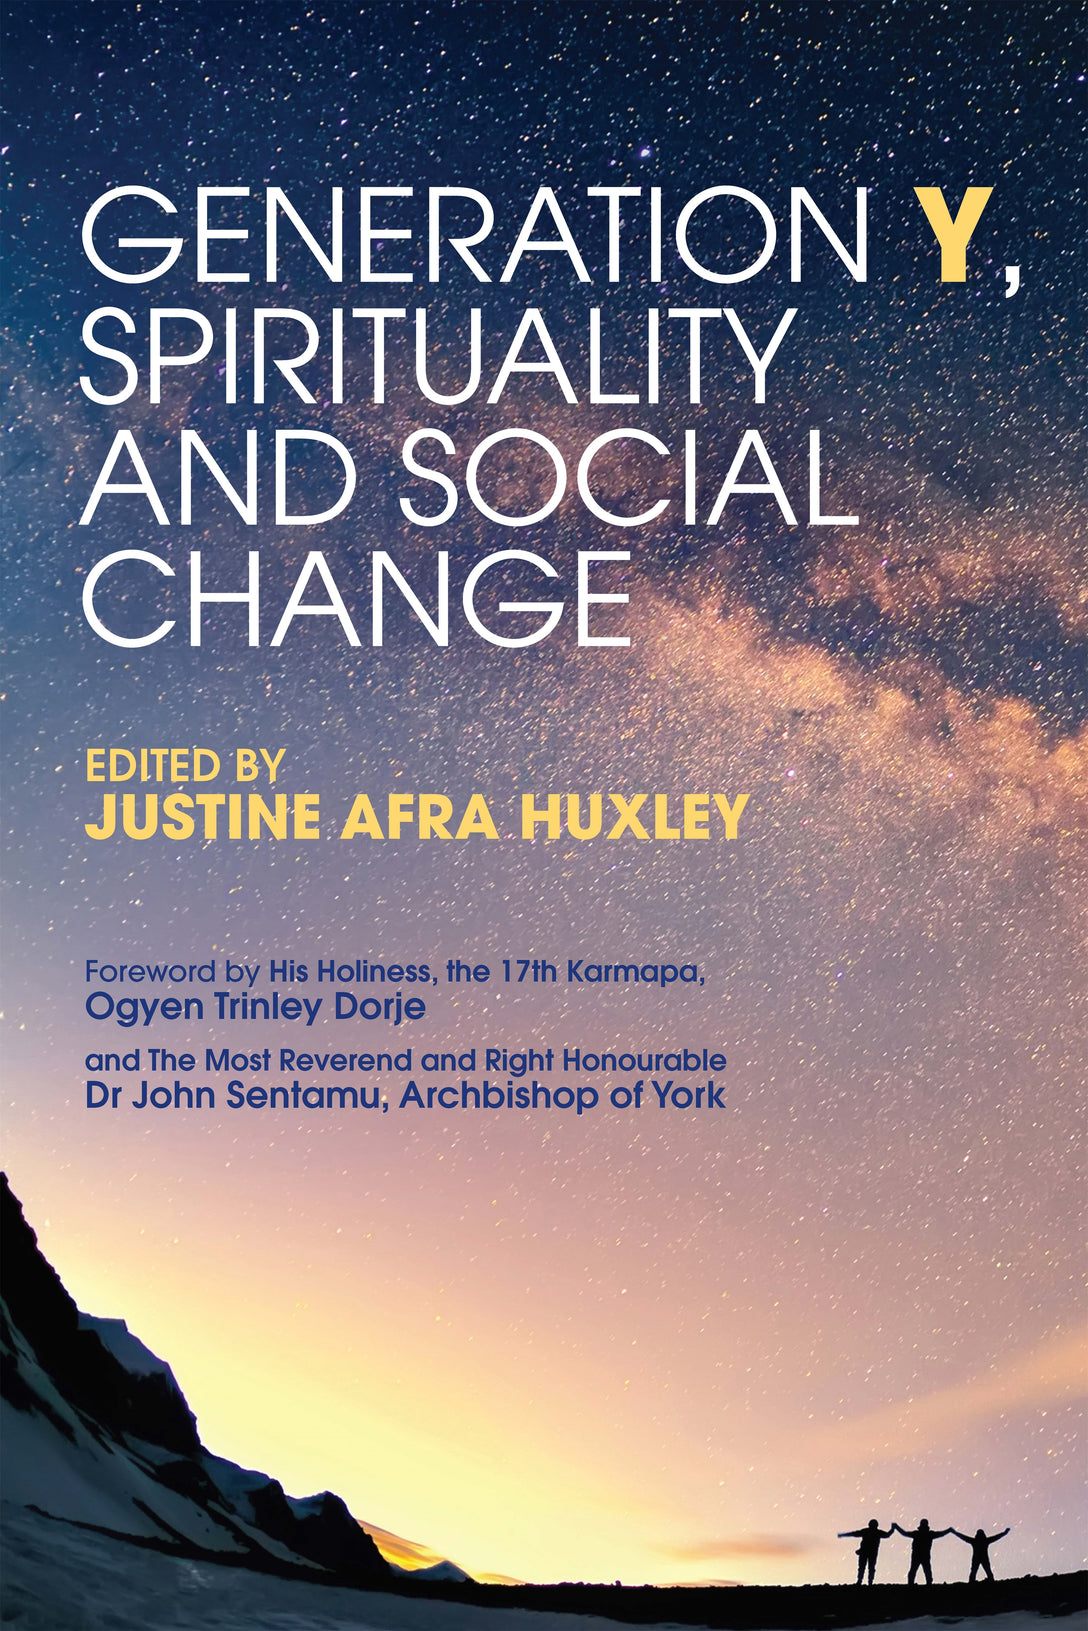 Generation Y, Spirituality and Social Change by No Author Listed, Justine Afra Huxley